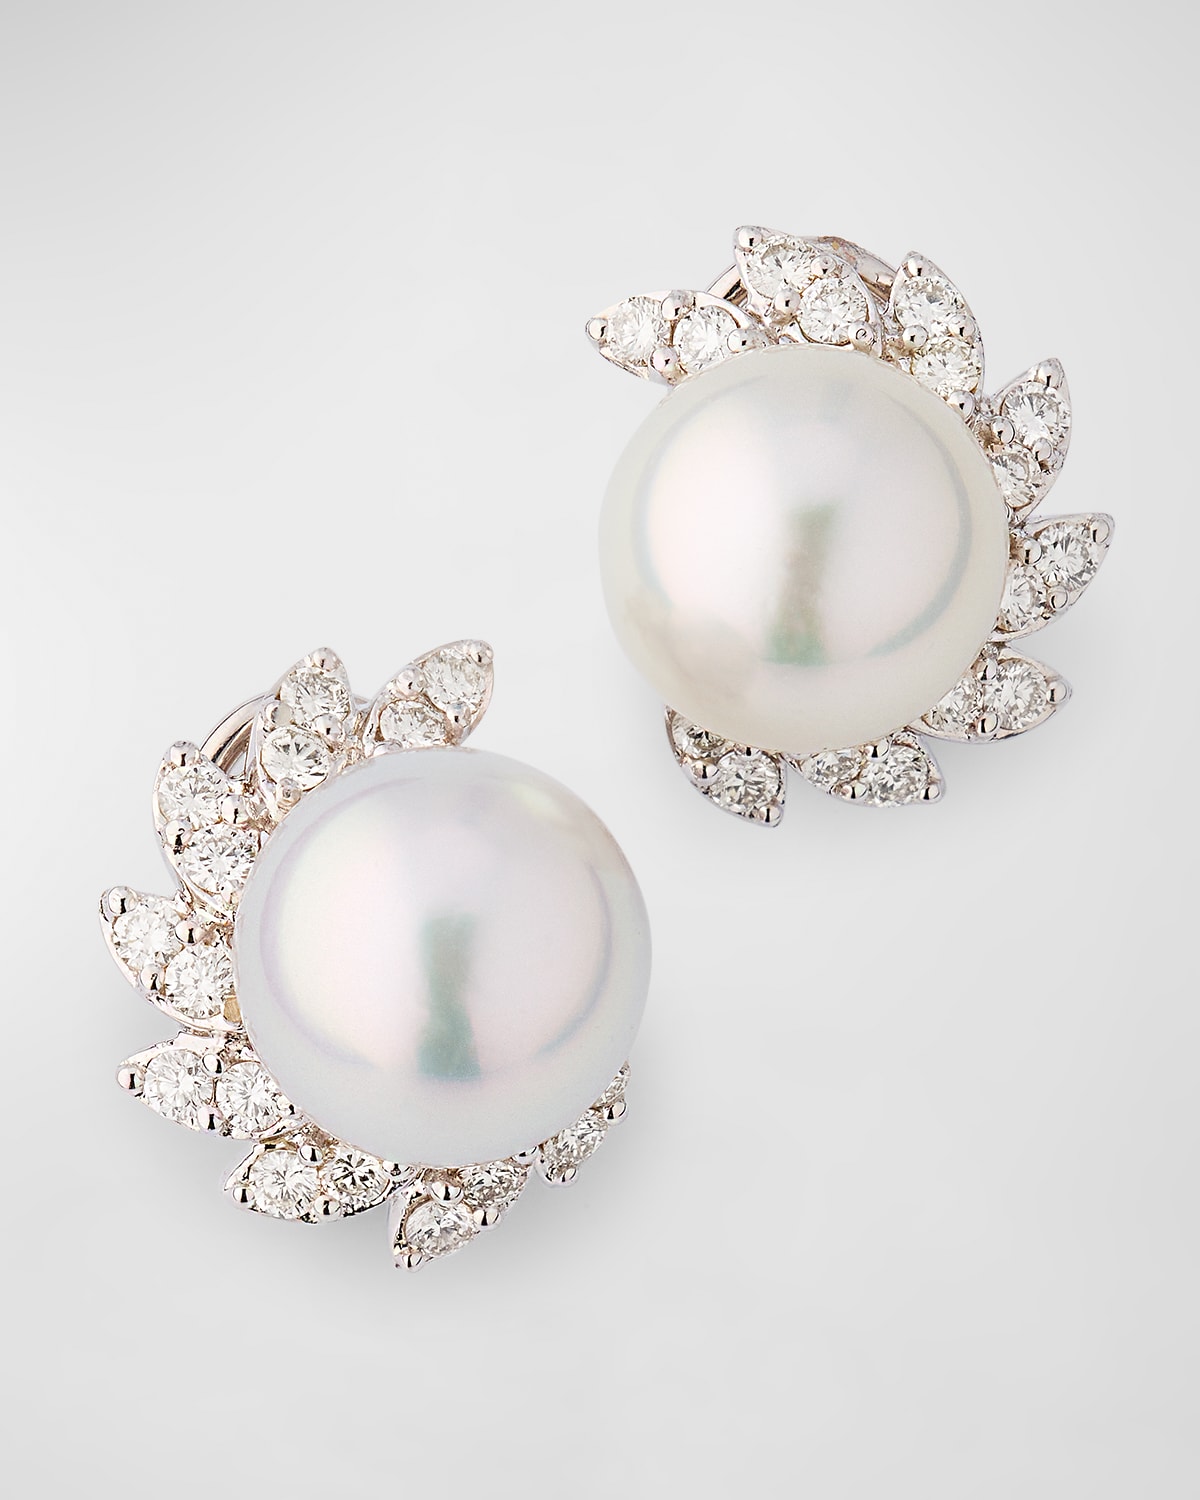 18K White Gold 11.5mm South Sea Pearl and Diamond Earrings